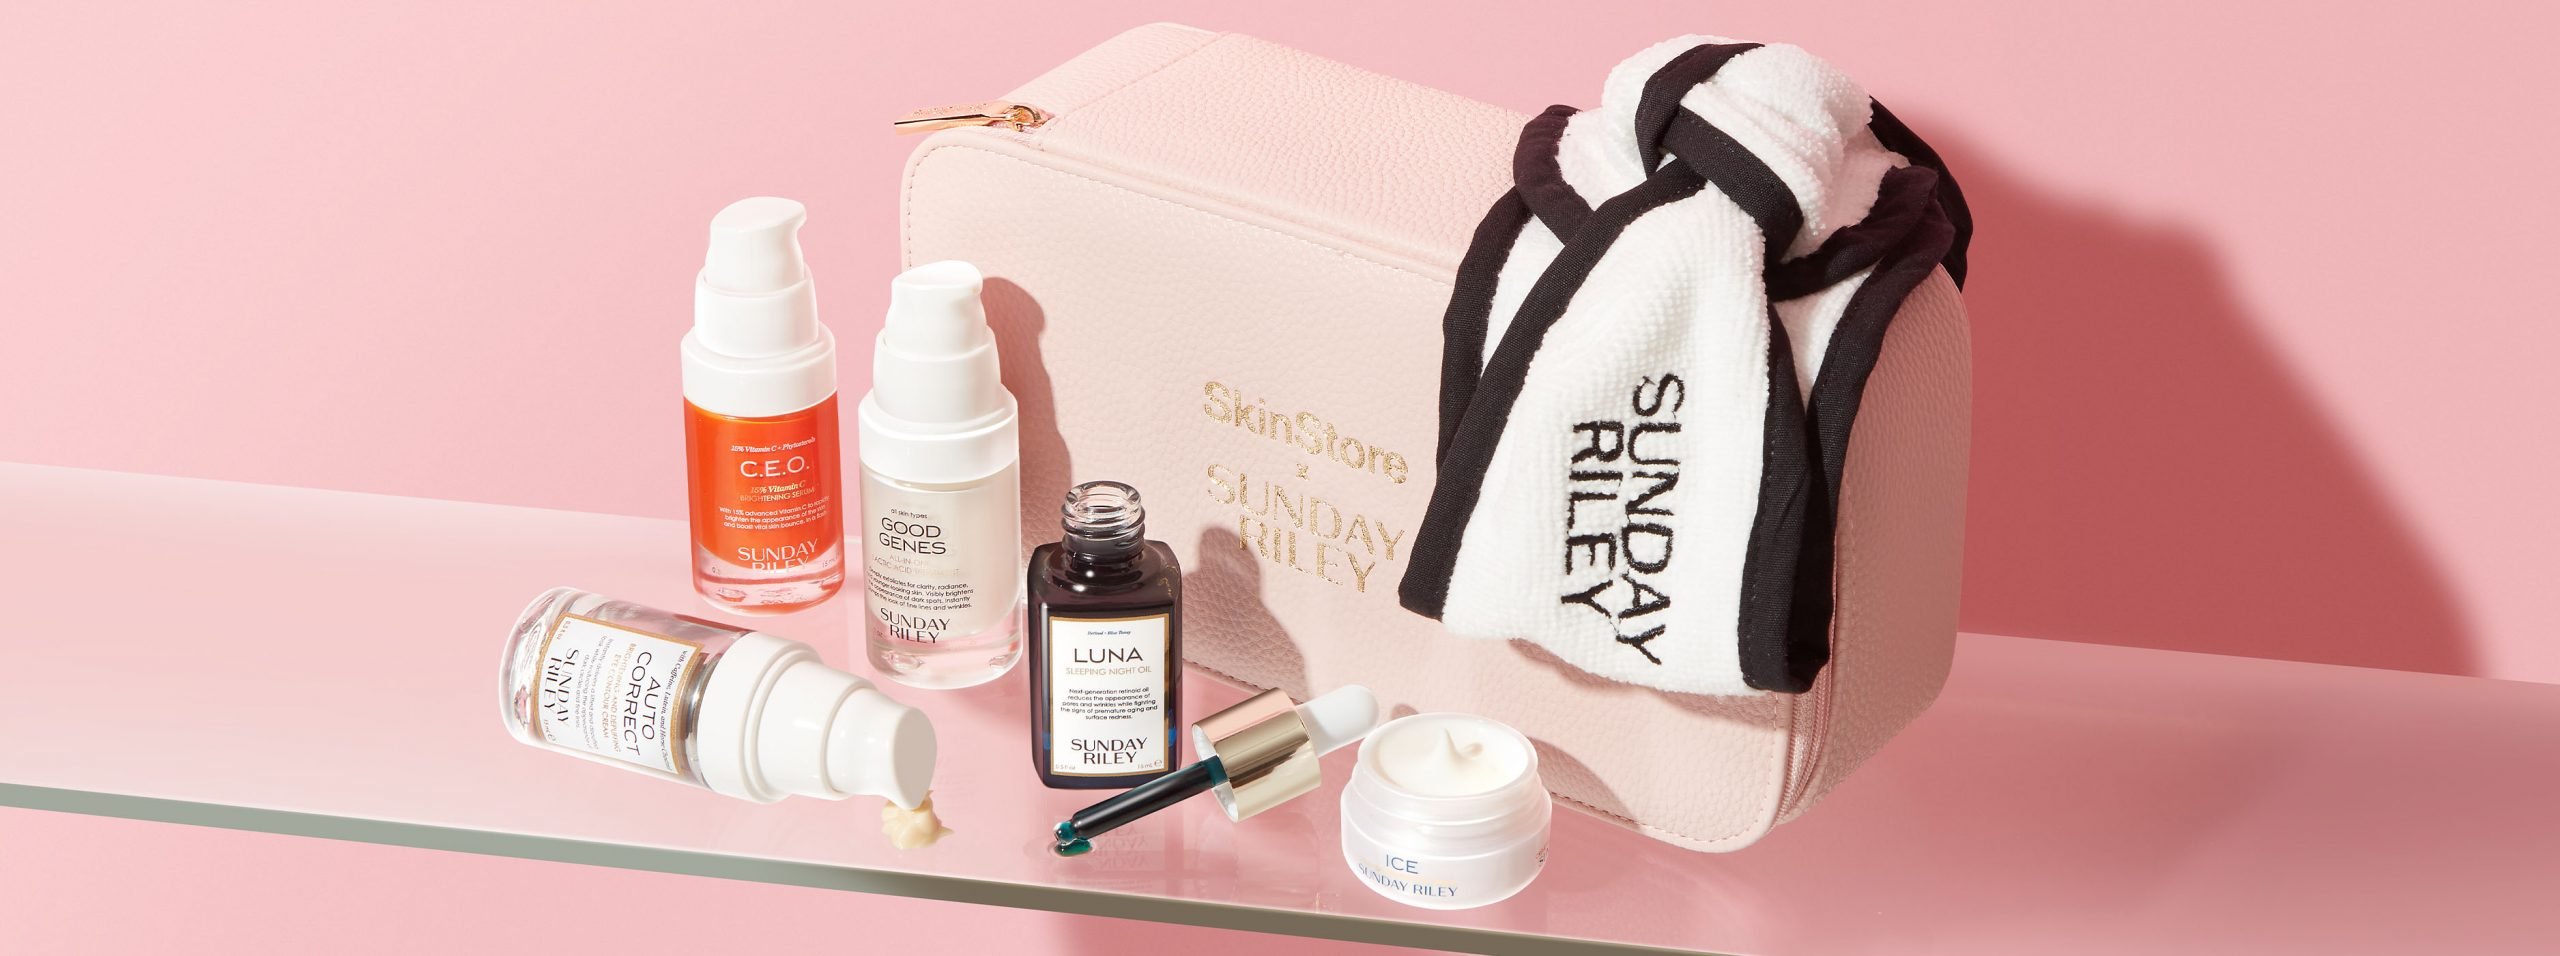 What’s Inside the SkinStore x Sunday Riley Limited Edition Beauty Bag